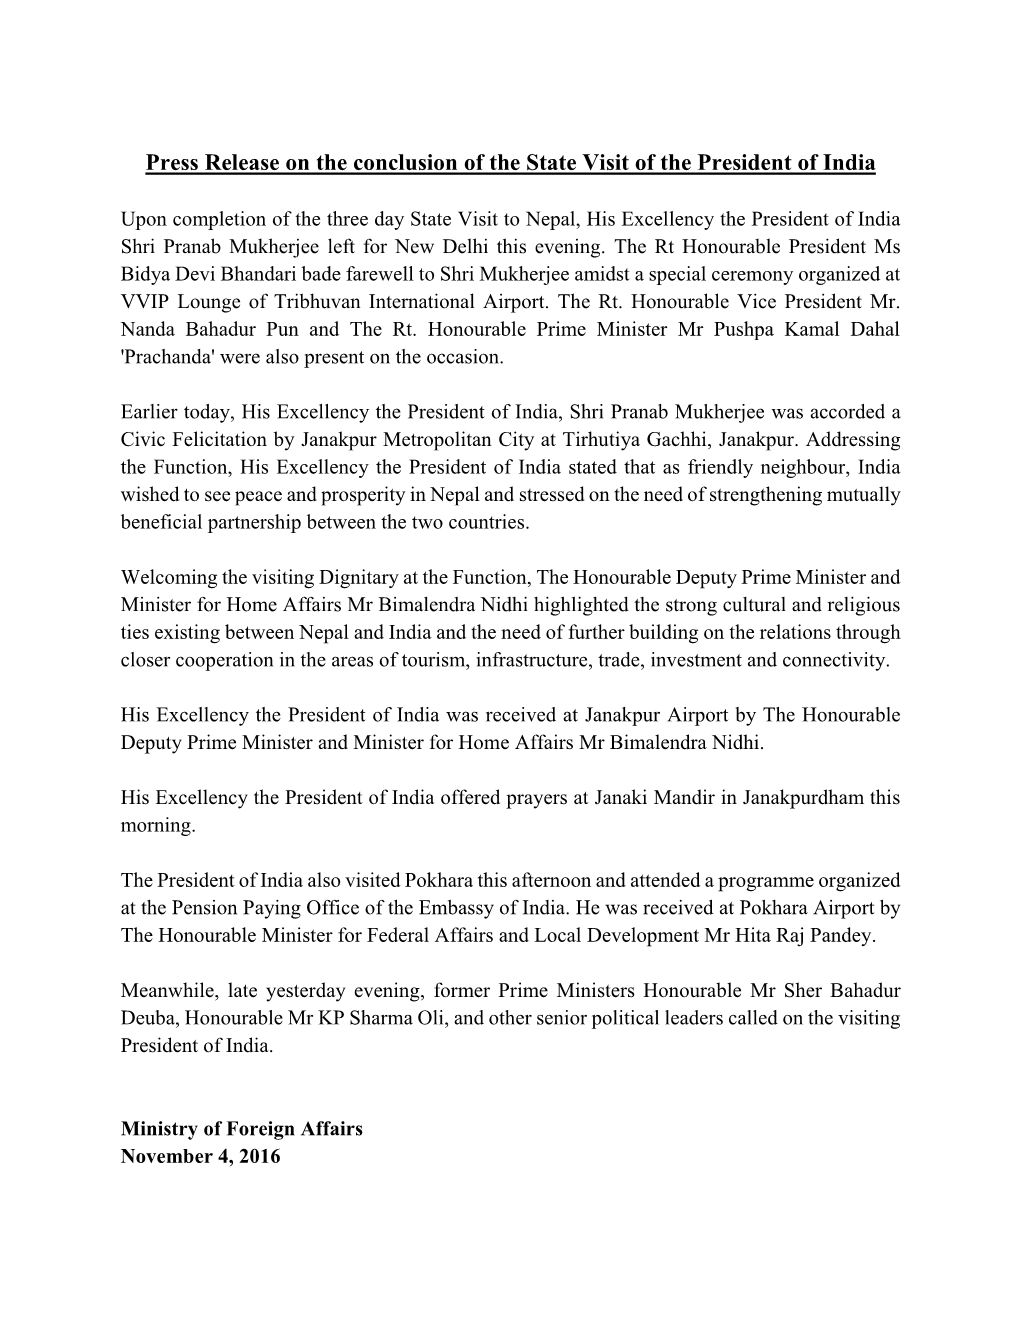 Press Release on the Conclusion of the State Visit of the President of India